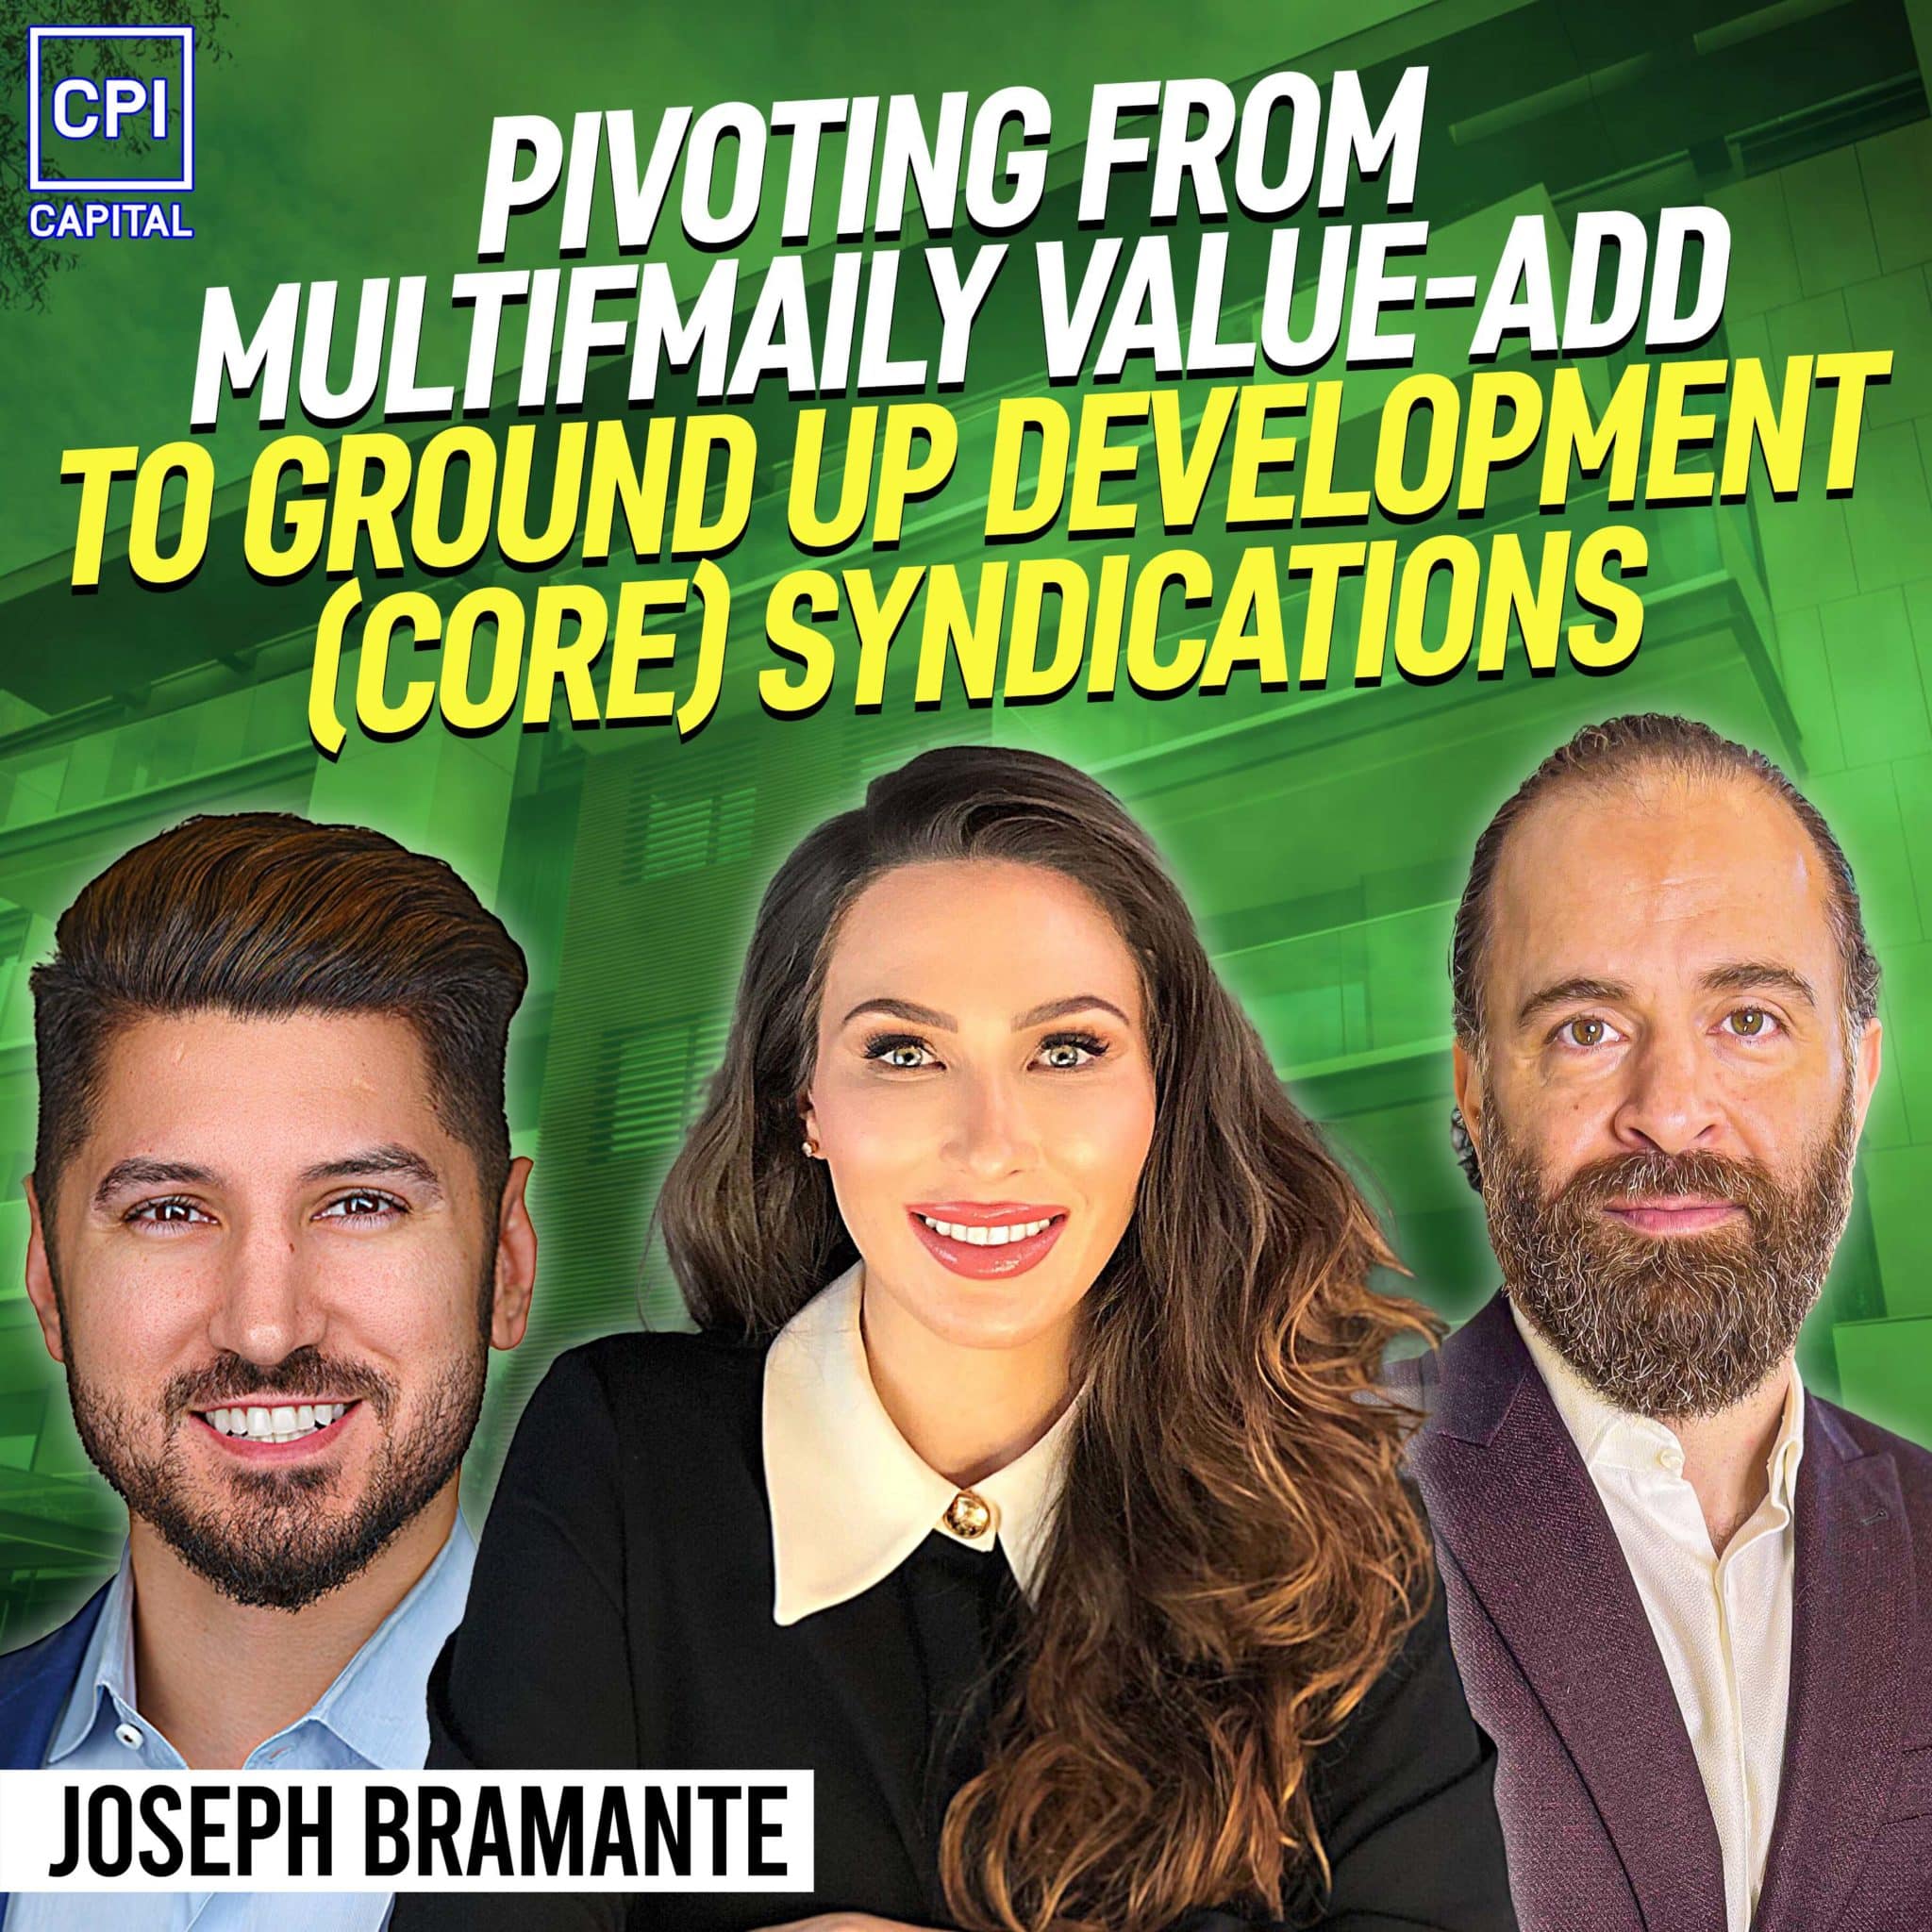 Pivoting From Multifamily Value-Add To Ground-Up Development (Core) Syndications – Joseph Bramante